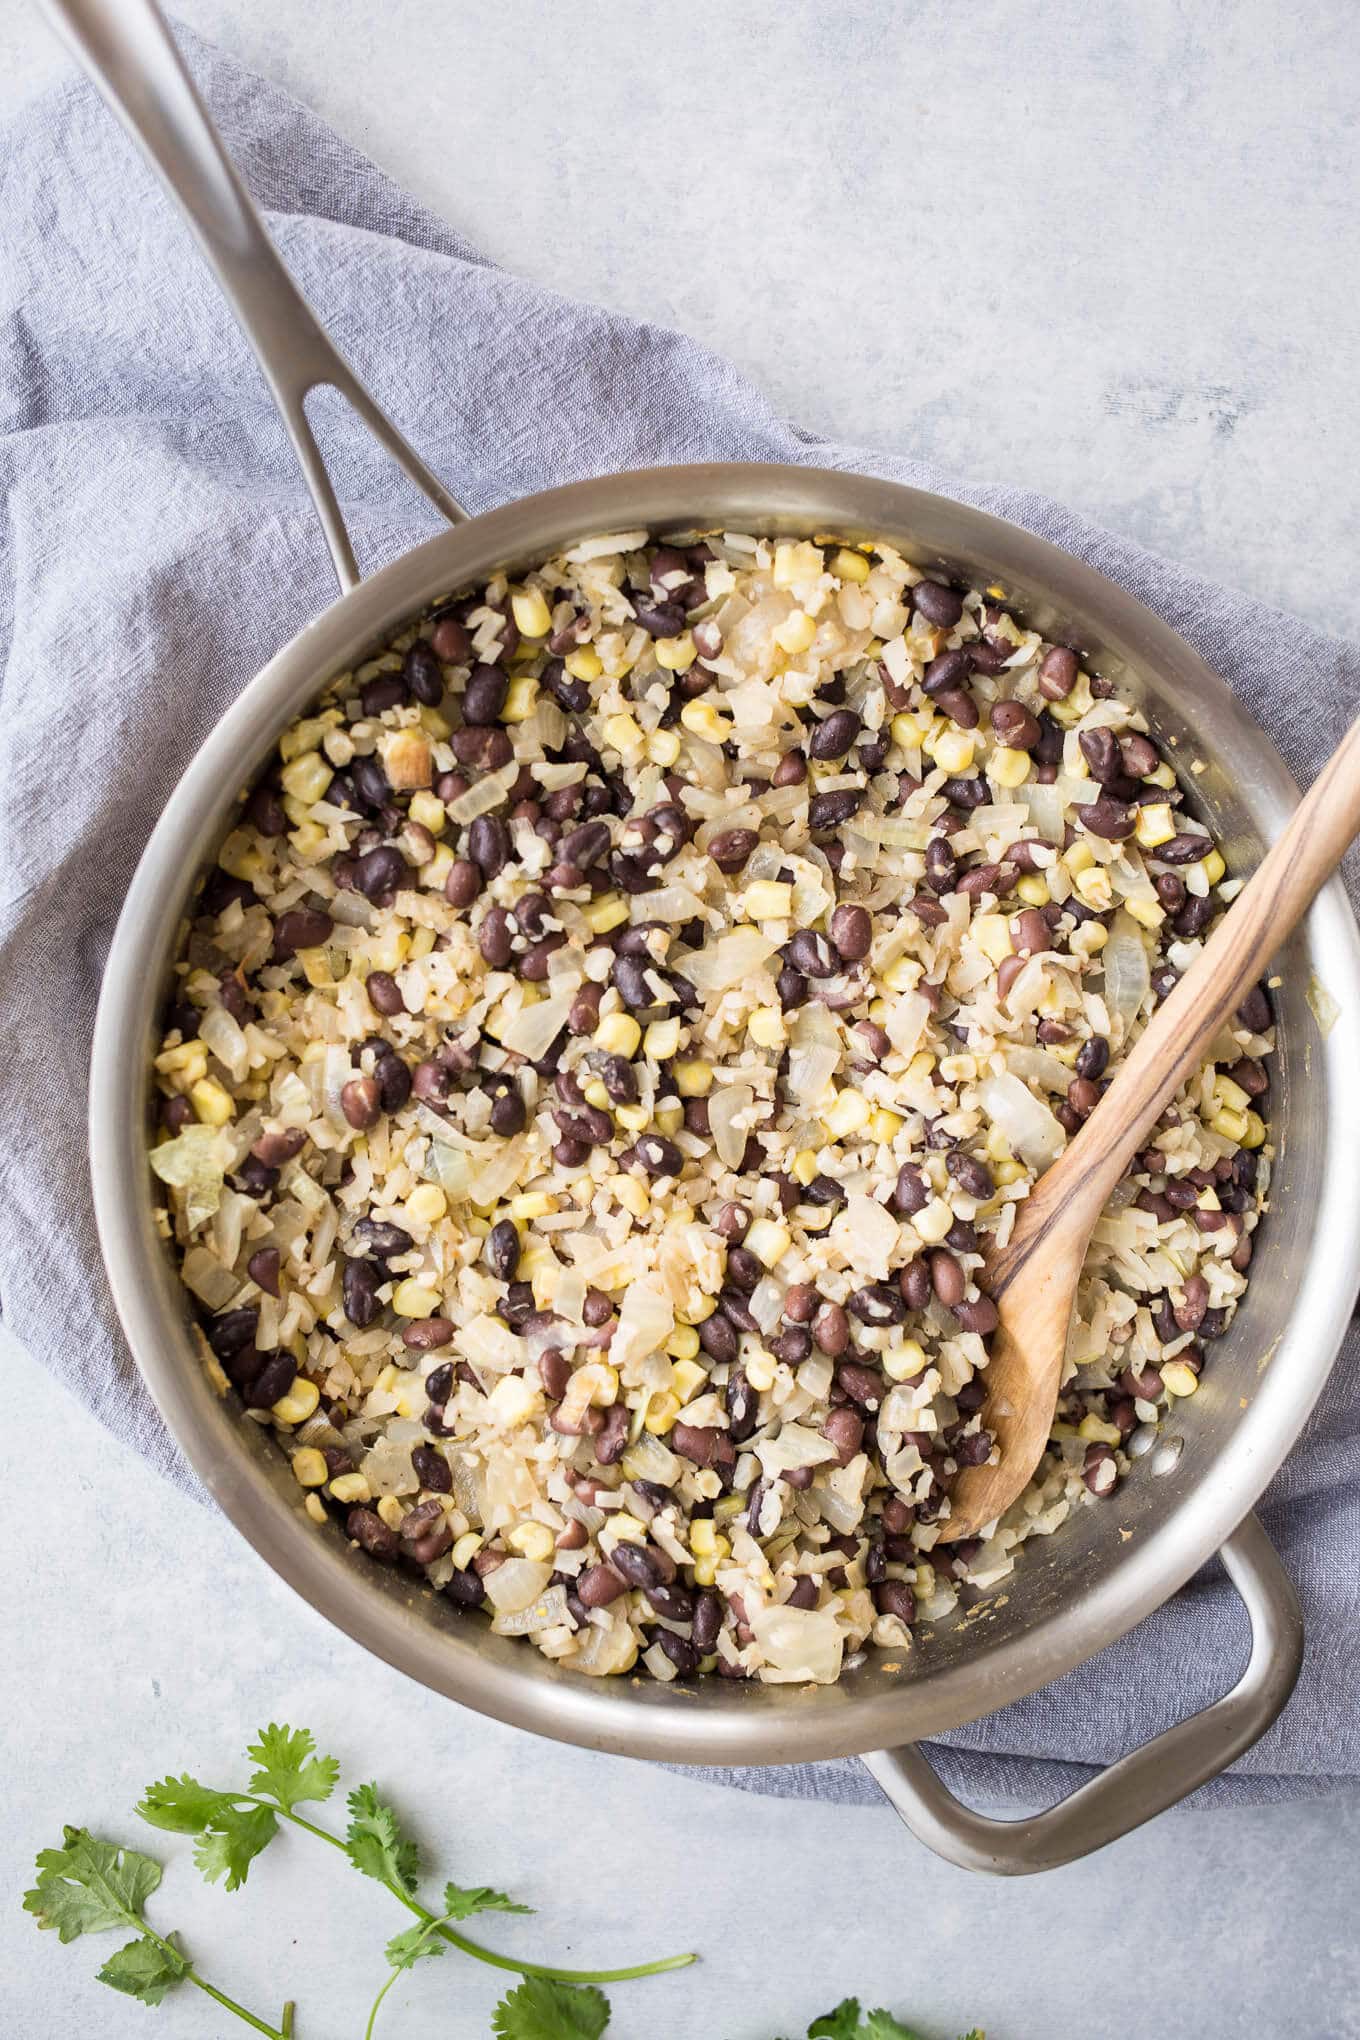 Cauliflower Rice and Black Beans with Corn is an easy vegetarian and gluten-free meal loaded with veggies.